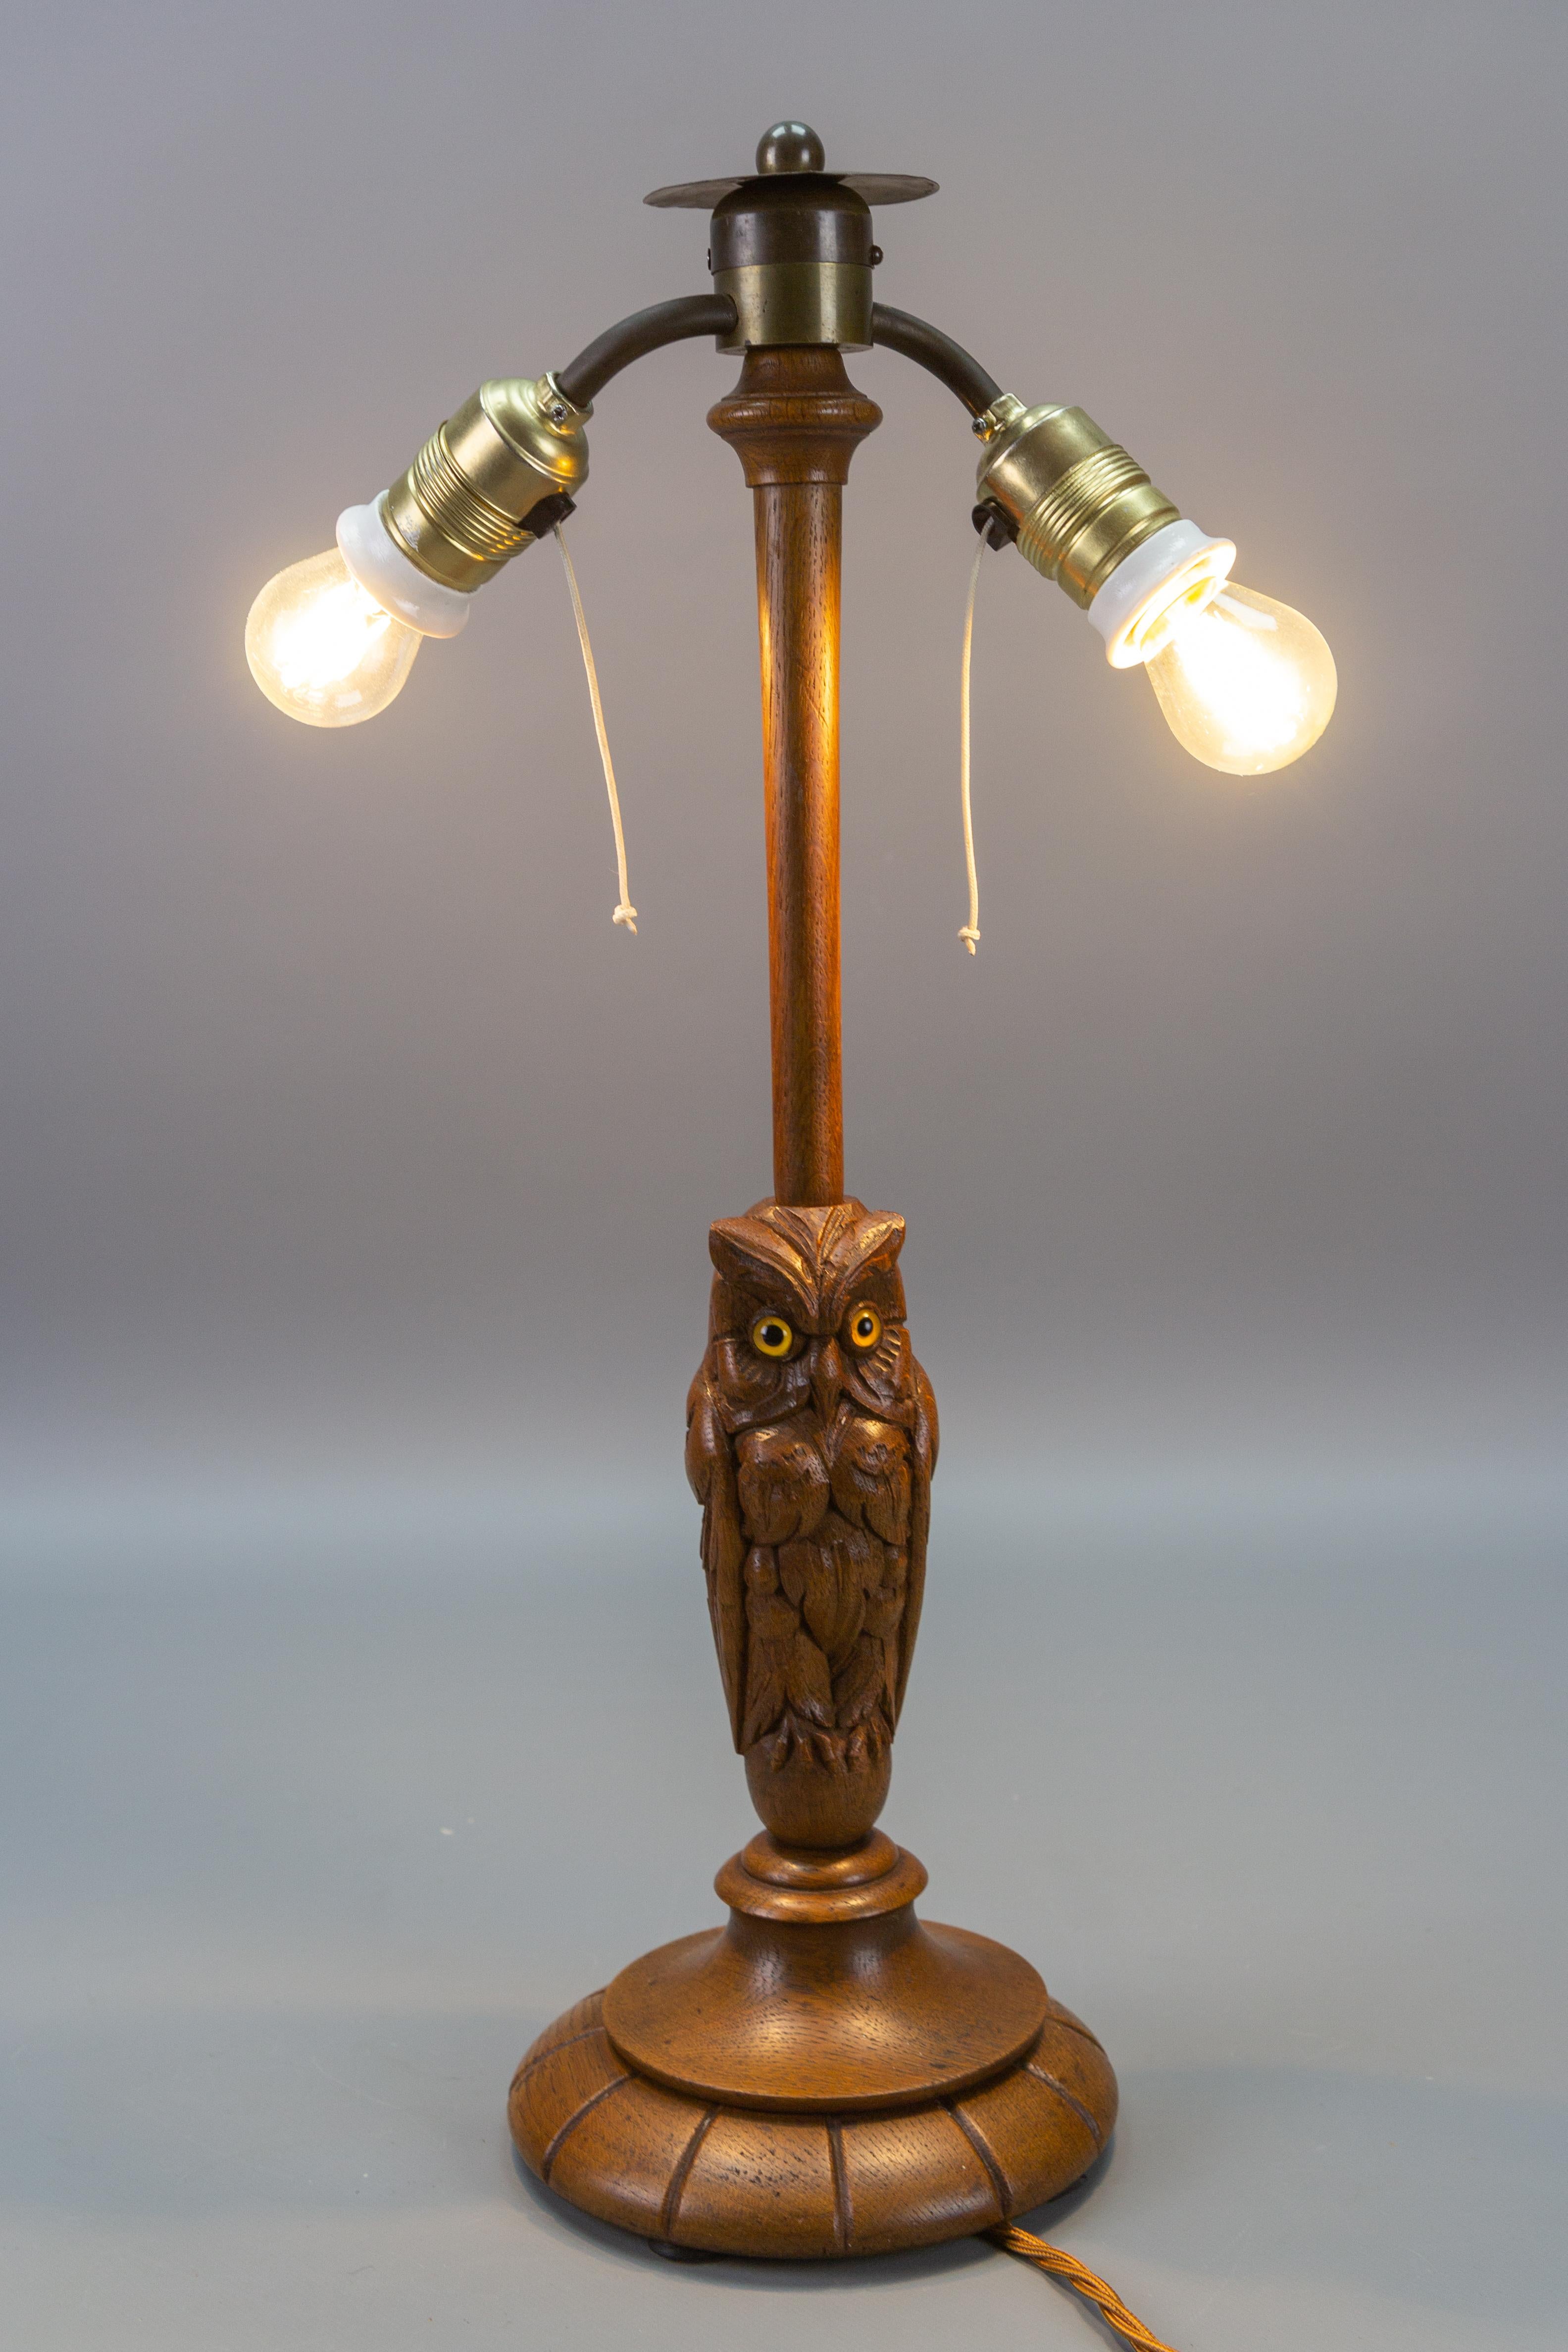 Early 20th Century Antique Art Deco Two-Light Owl Sculpture Table or Desk Lamp  Germany, ca. 1920 For Sale